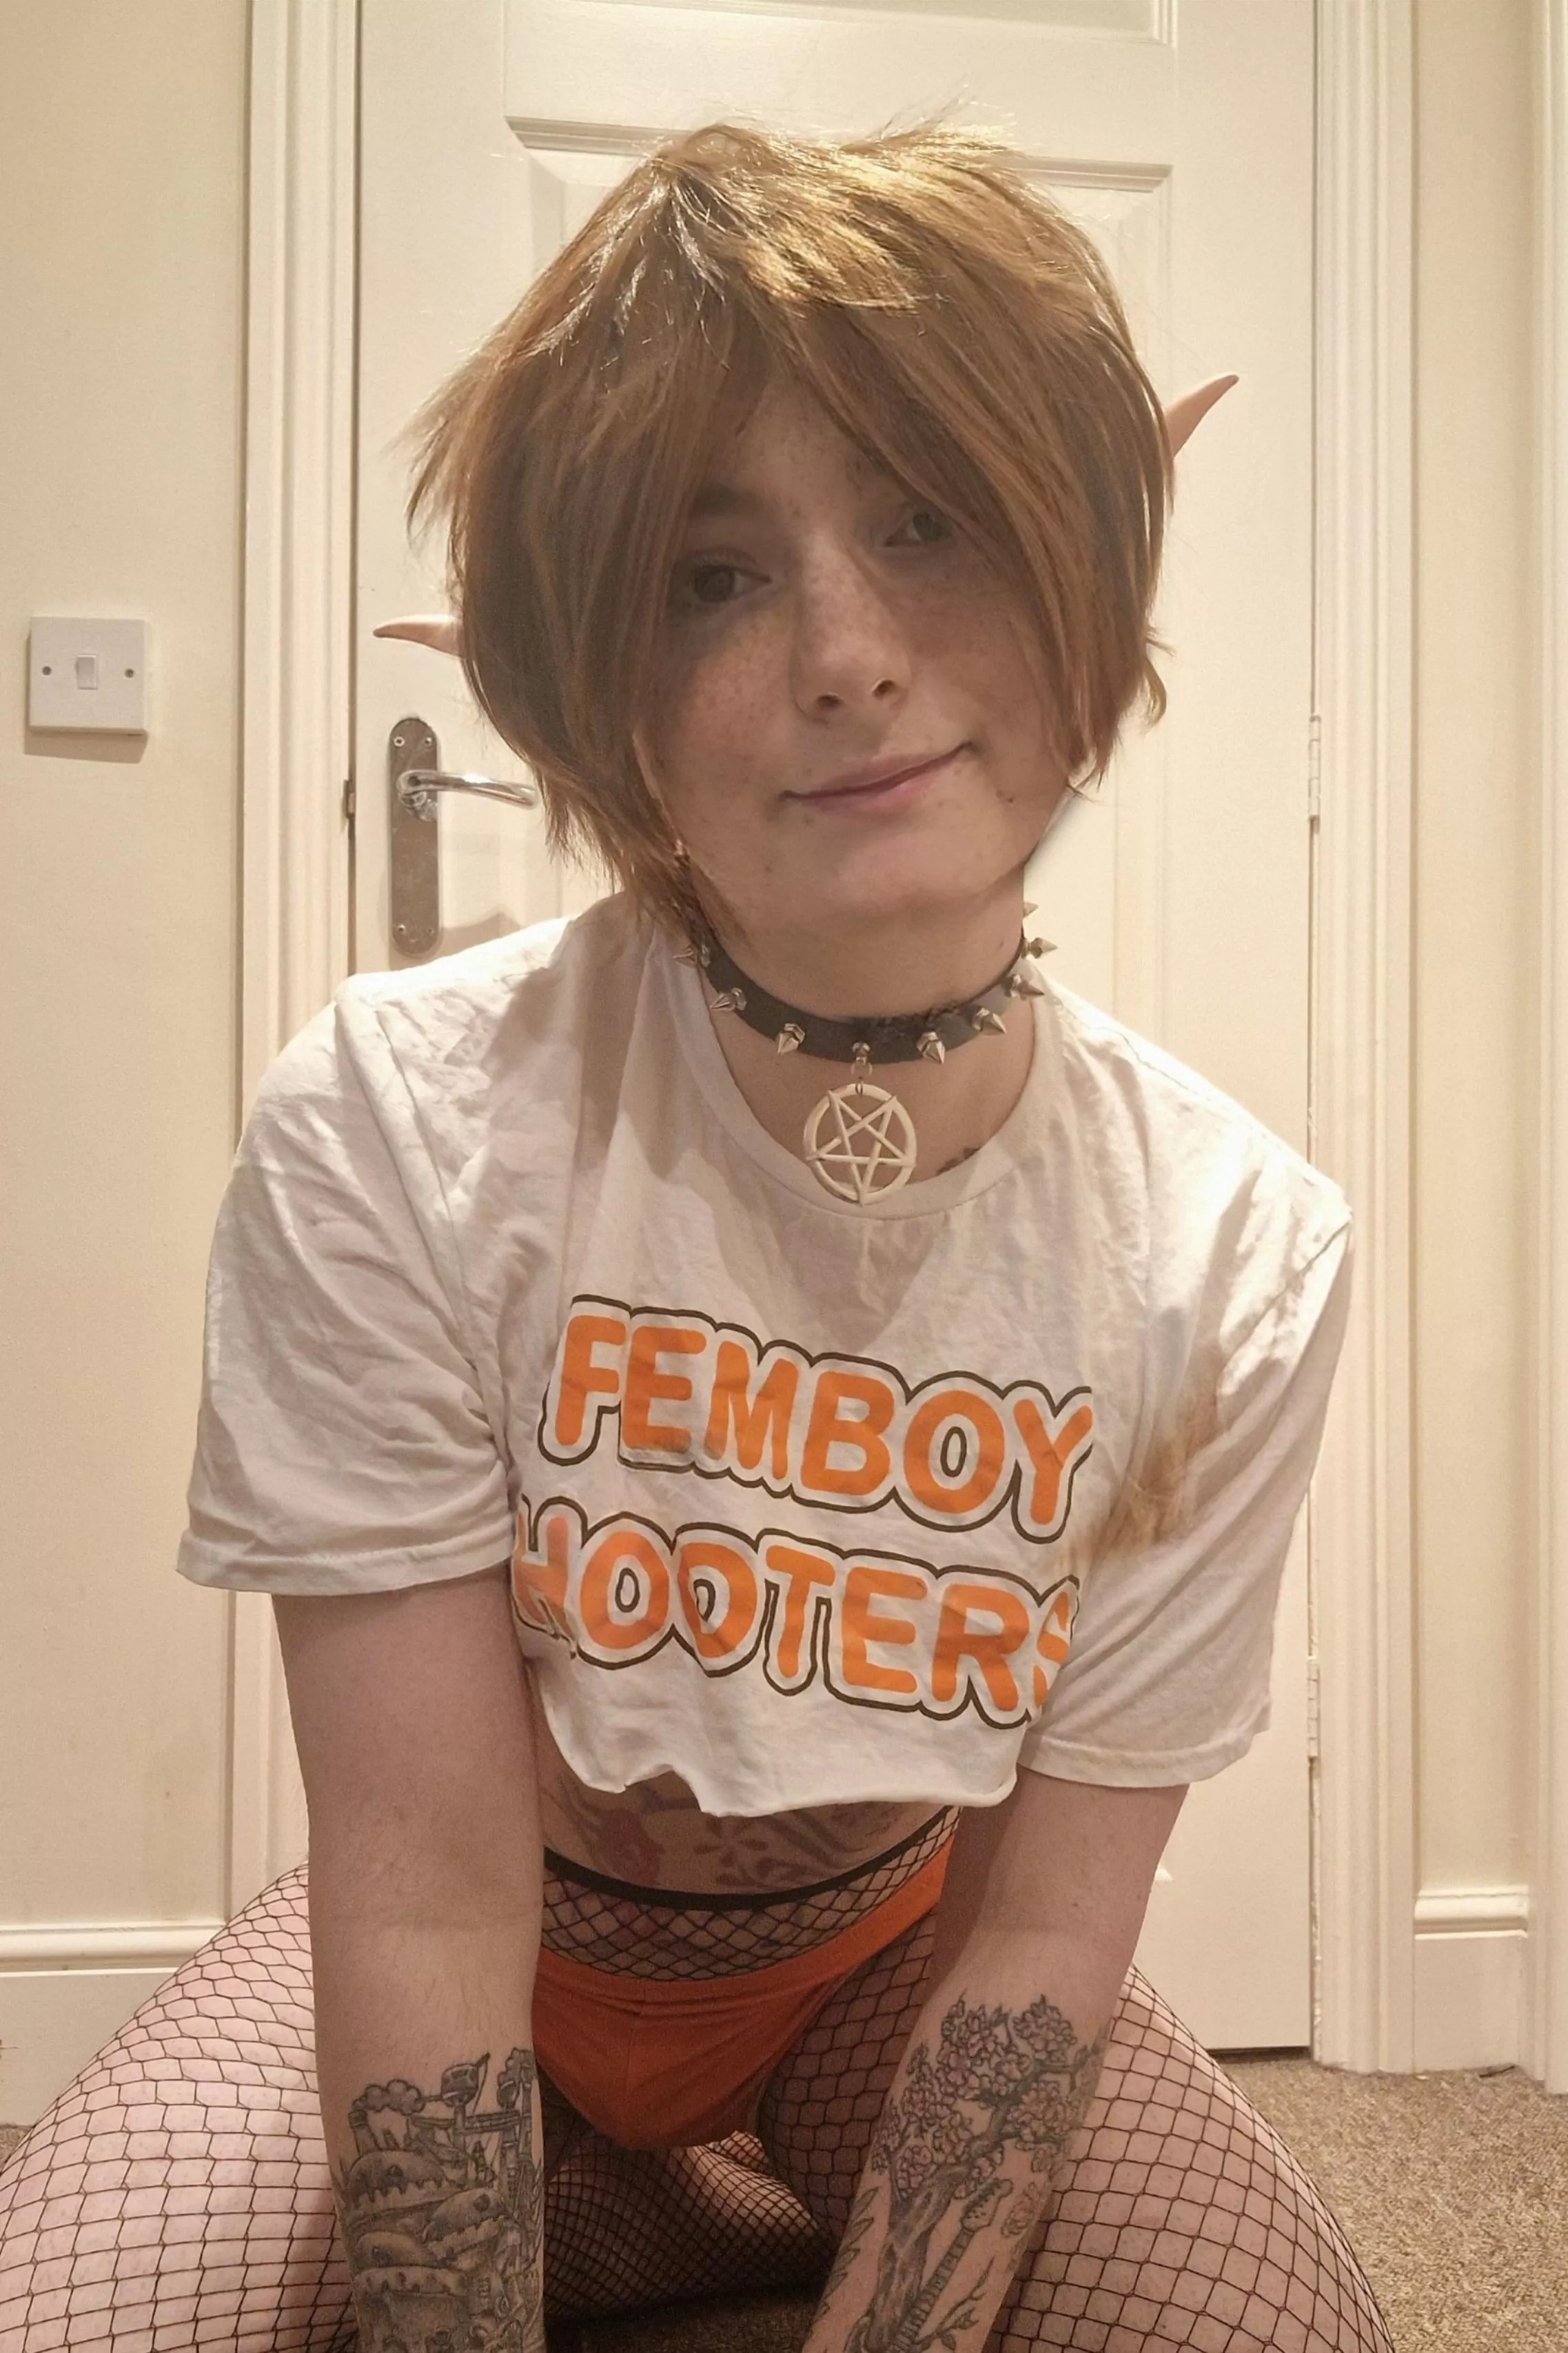 Think I Ll Be A Good Femboy Hooter Employee Nudes Femboy NUDE PICS ORG